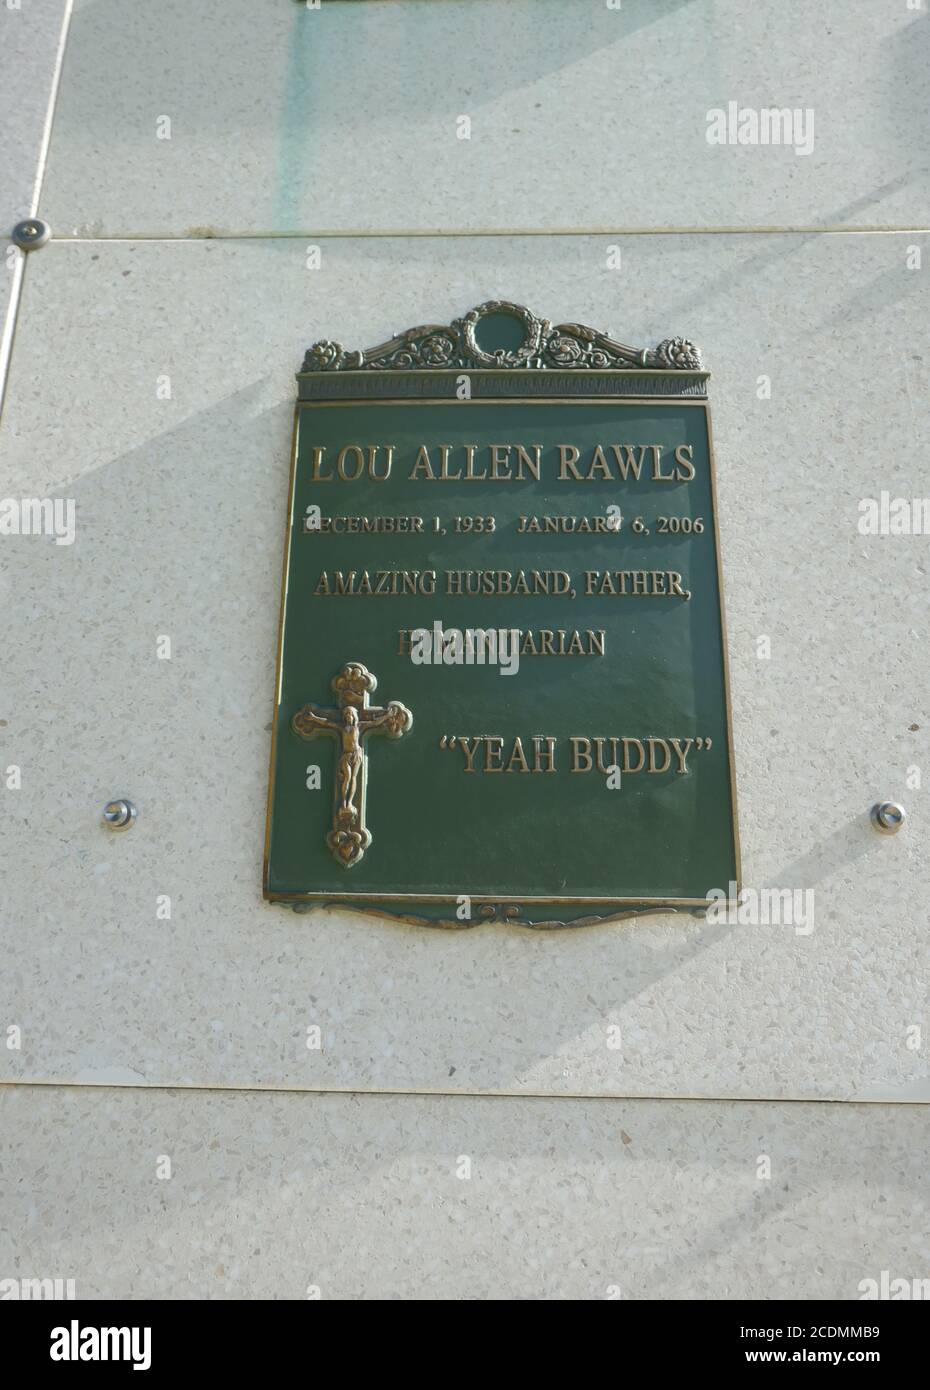 Los Angeles, California, USA 28th August 2020 A general view of atmosphere of Singer Lou Rawls Grave at Forest Lawn Memorial Park Hollywood Hills on August 28, 2020 in Los Angeles, California, USA. Photo by Barry King/Alamy Stock Photo Stock Photo